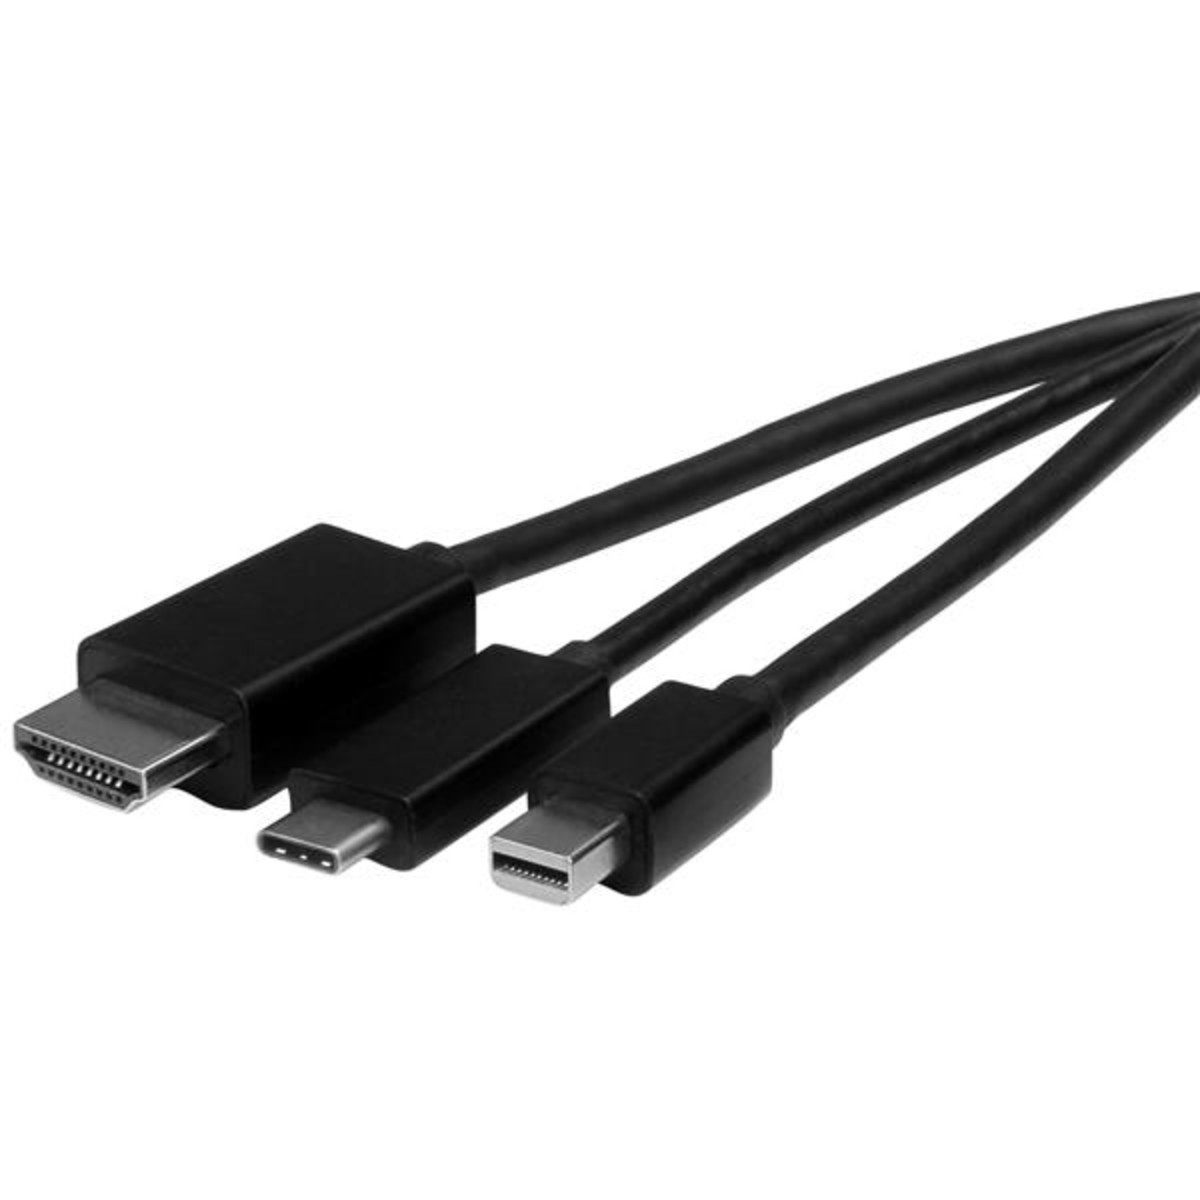 USB-C HDMI or mDP to HDMI Adapter 6ft